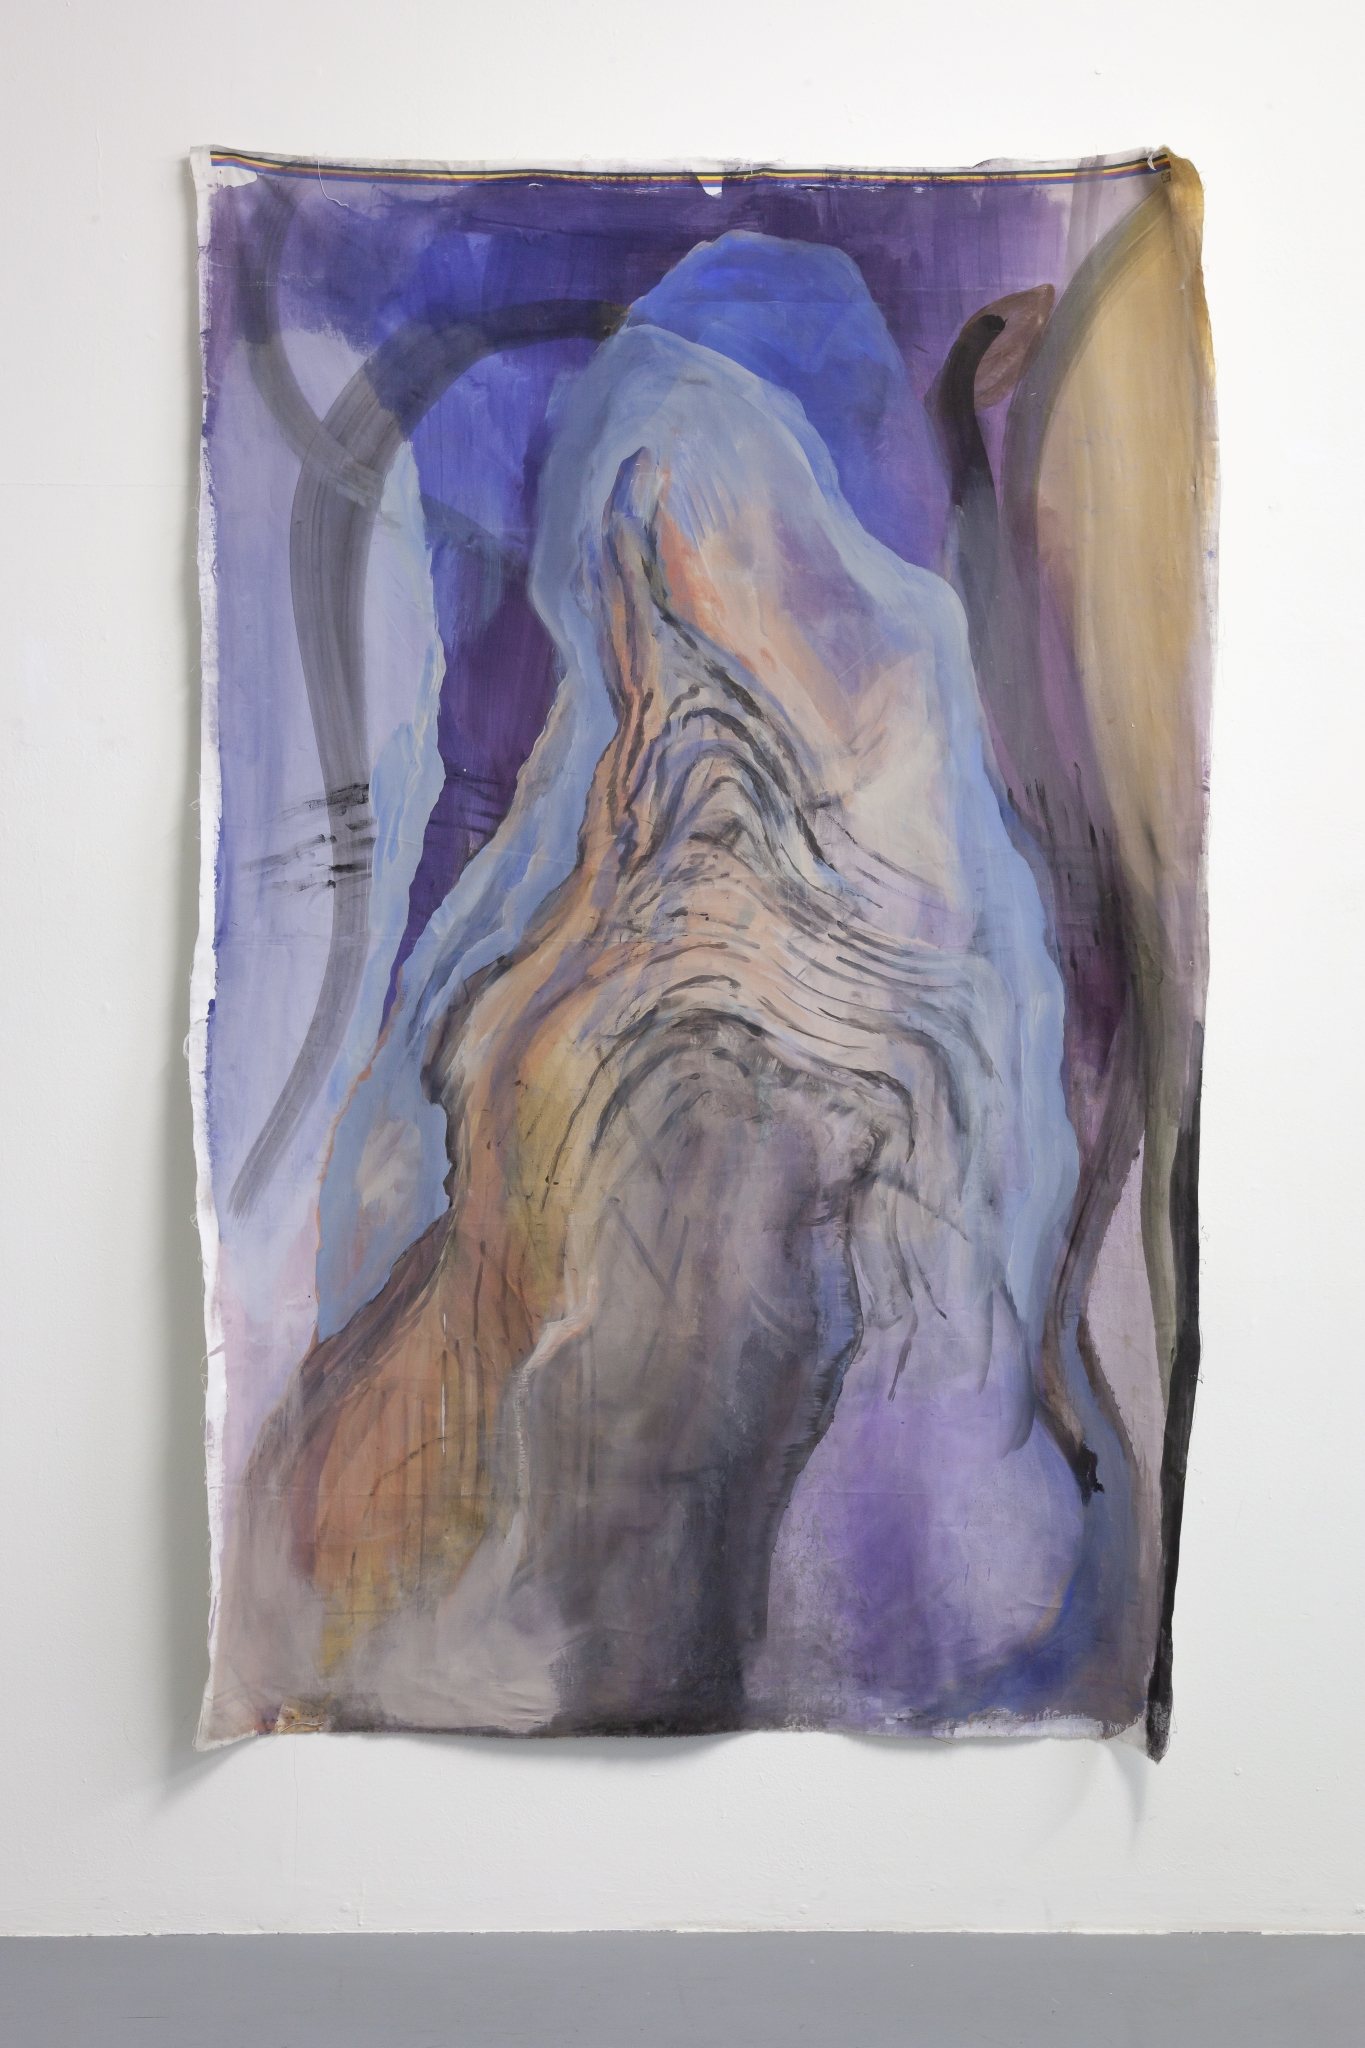 Paulina Semkowicz, "Cave", 2024, acrylic and pigment on canvas, 223x143 cm